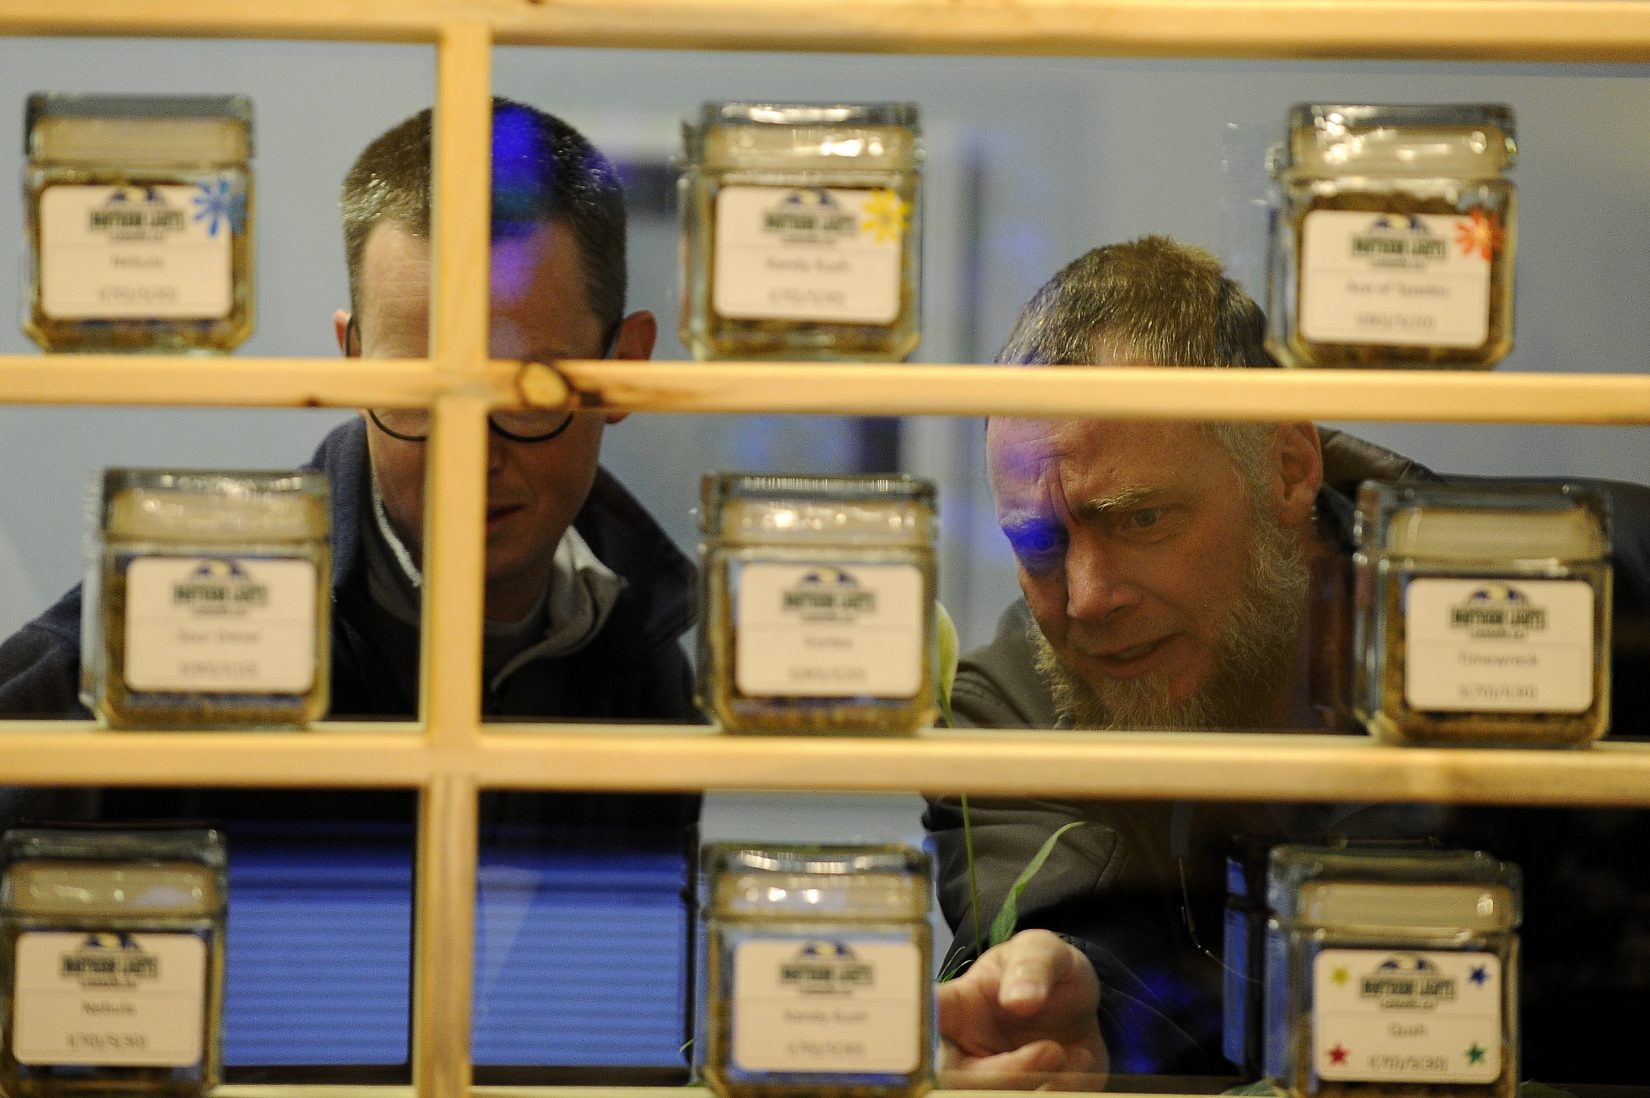 Greg Nidy, left, Dan Briley, right, at Northern Lights Cannabis Co in Edgewater, Colorado on January 1, 2014. (Photo by Seth McConnell/The Denver Post)